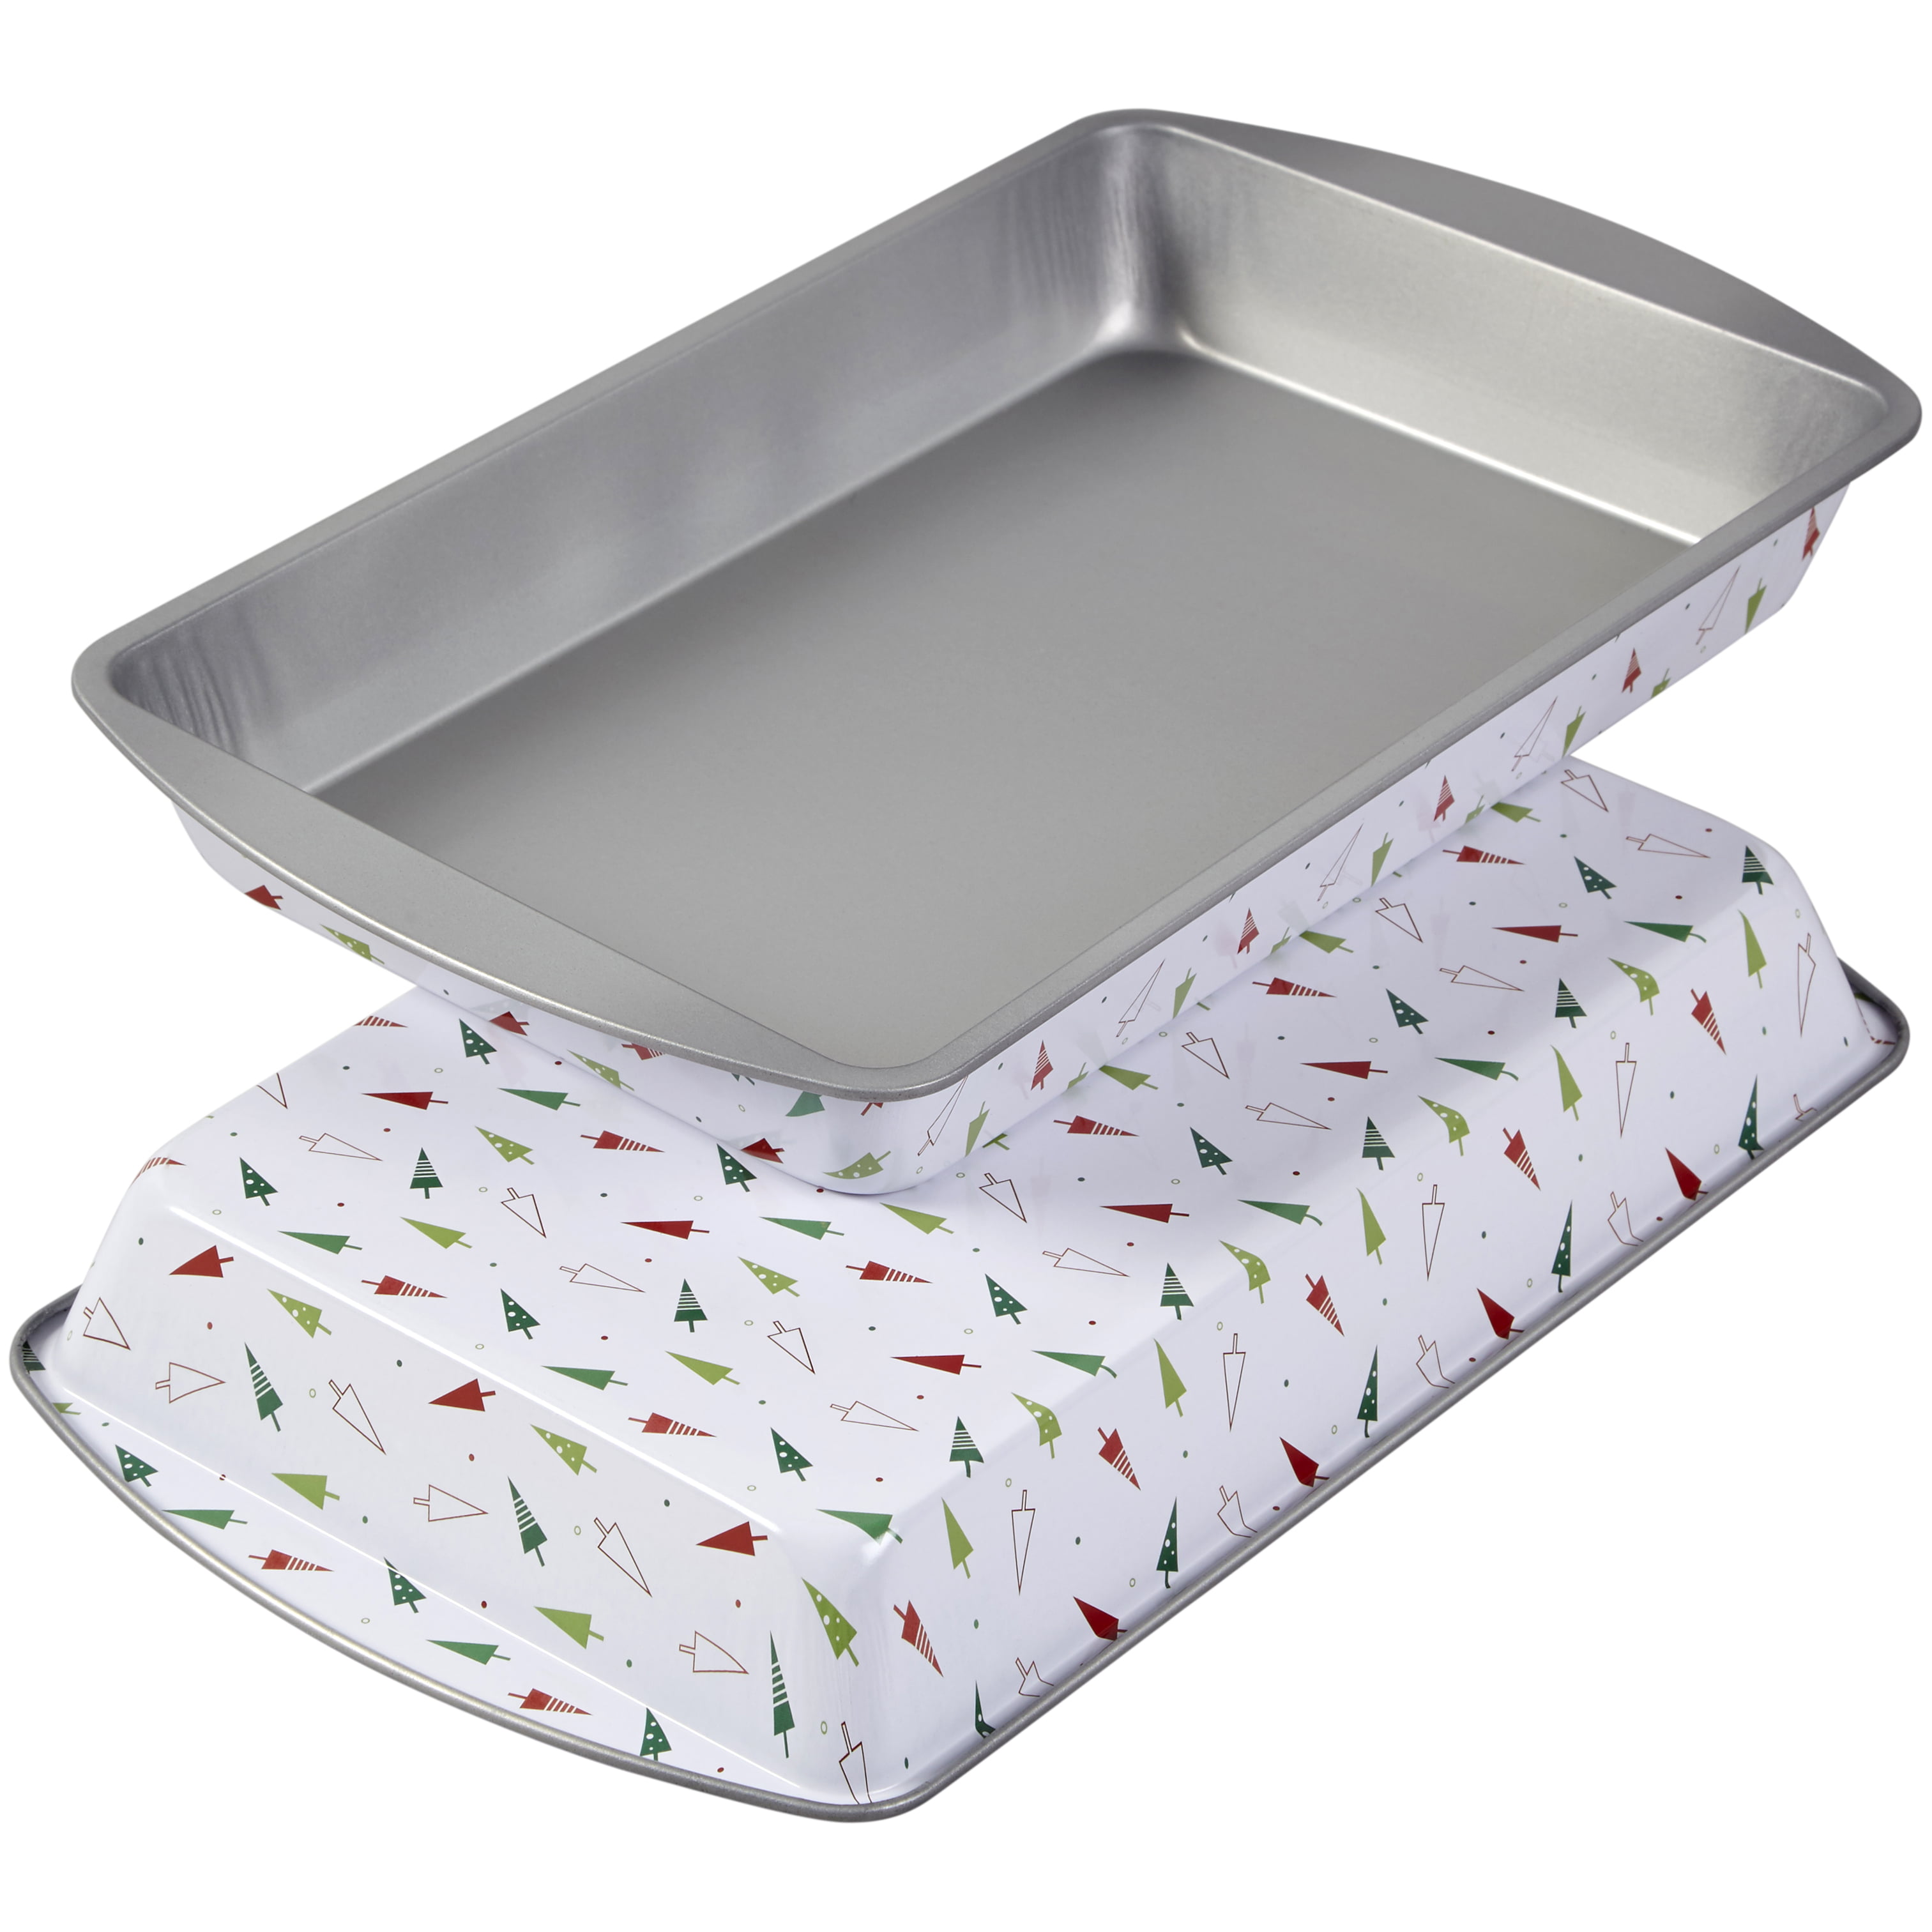 Holiday Home Large Embossed Patterned Christmas Baking Pan, 12 x 8 in -  Kroger